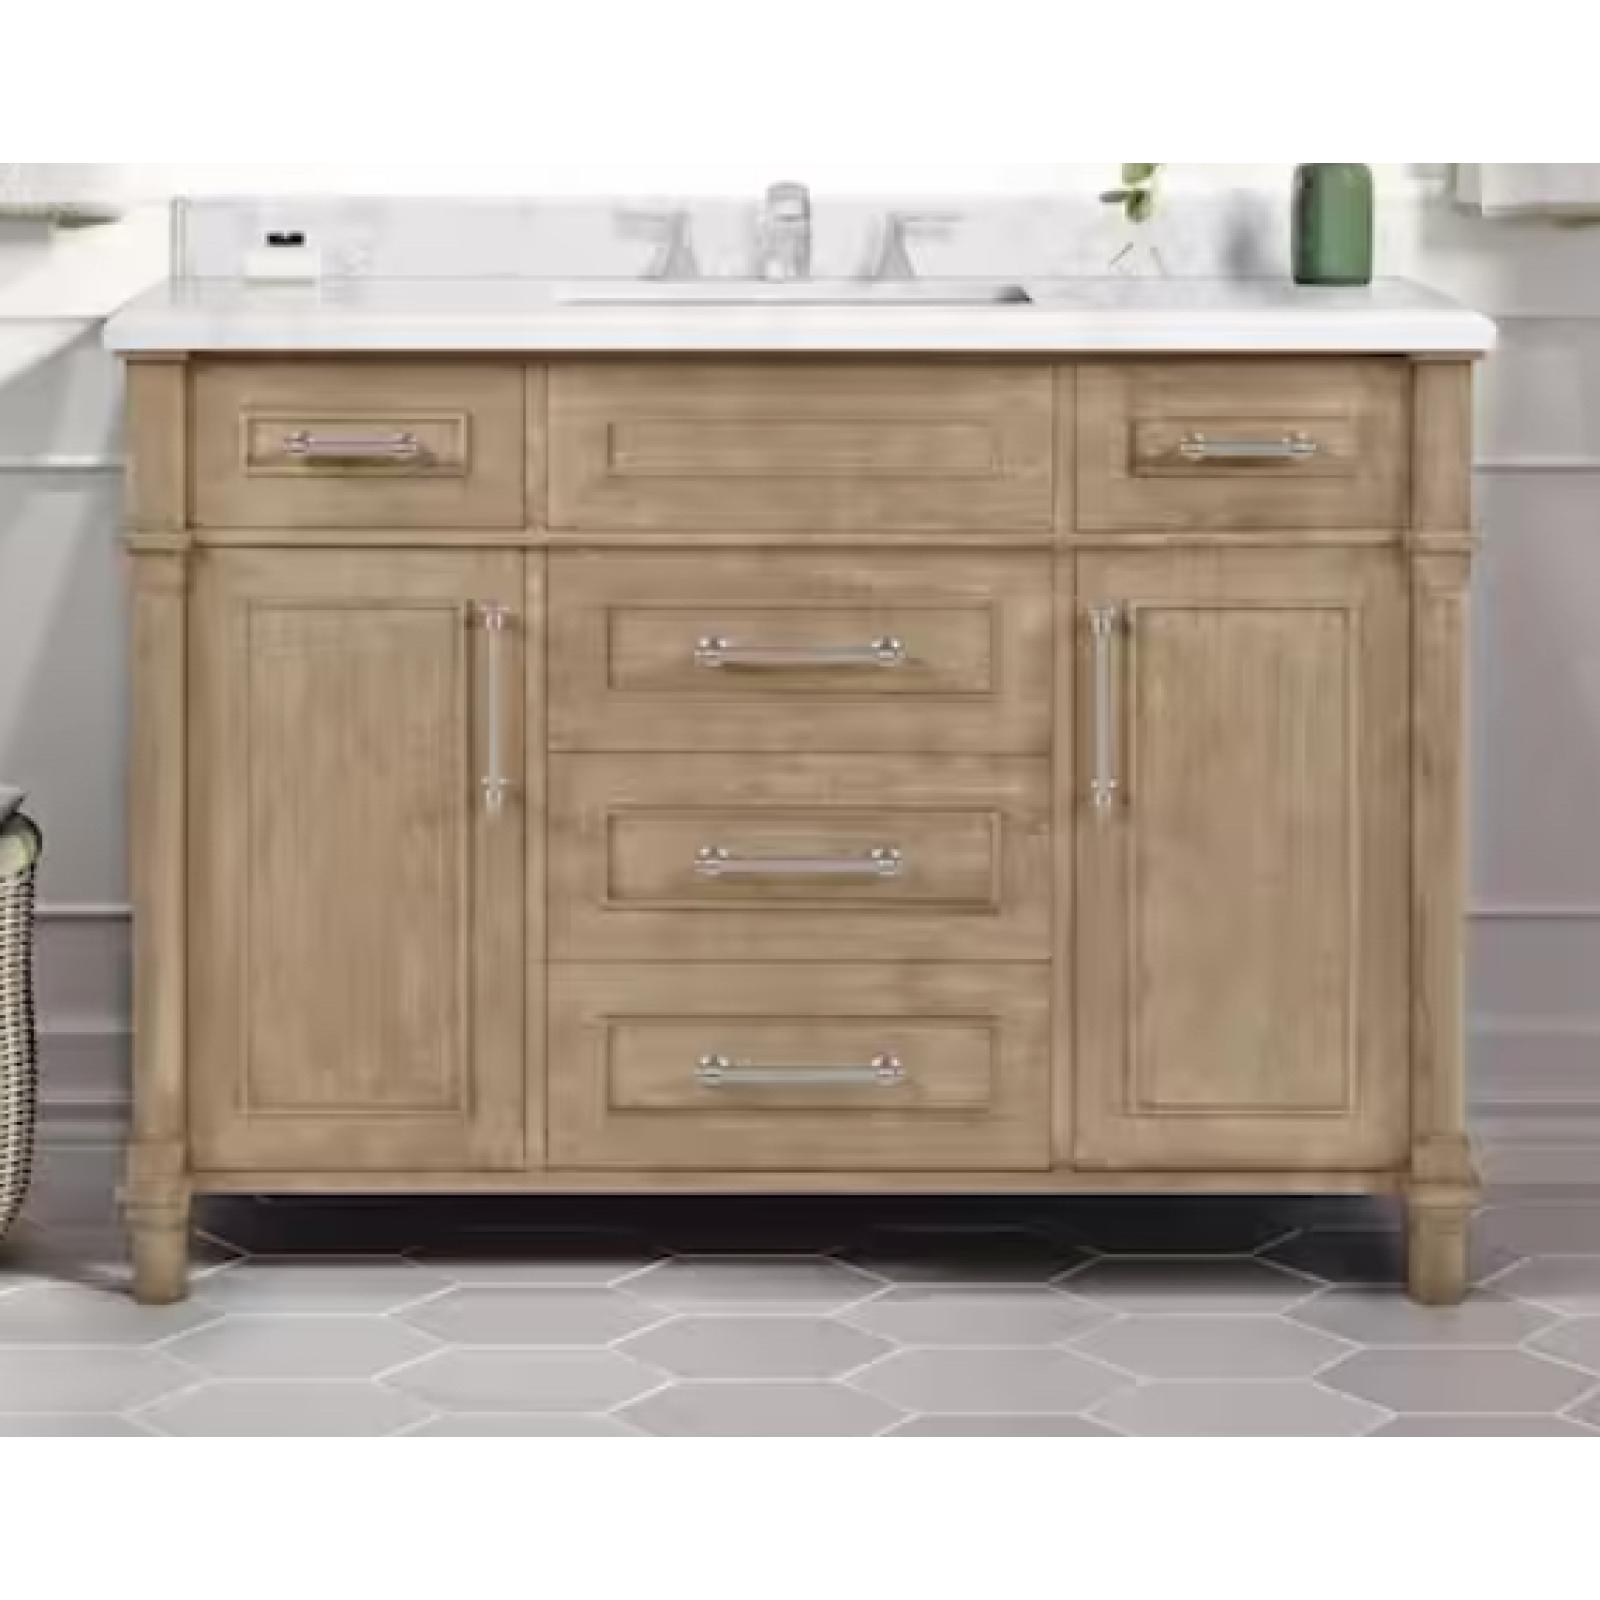 DALLAS LOCATION -  NEW! Home Decorators Collection Aberdeen 48 in. Single Sink Freestanding Antique Oak Bath Vanity with Carrara Marble